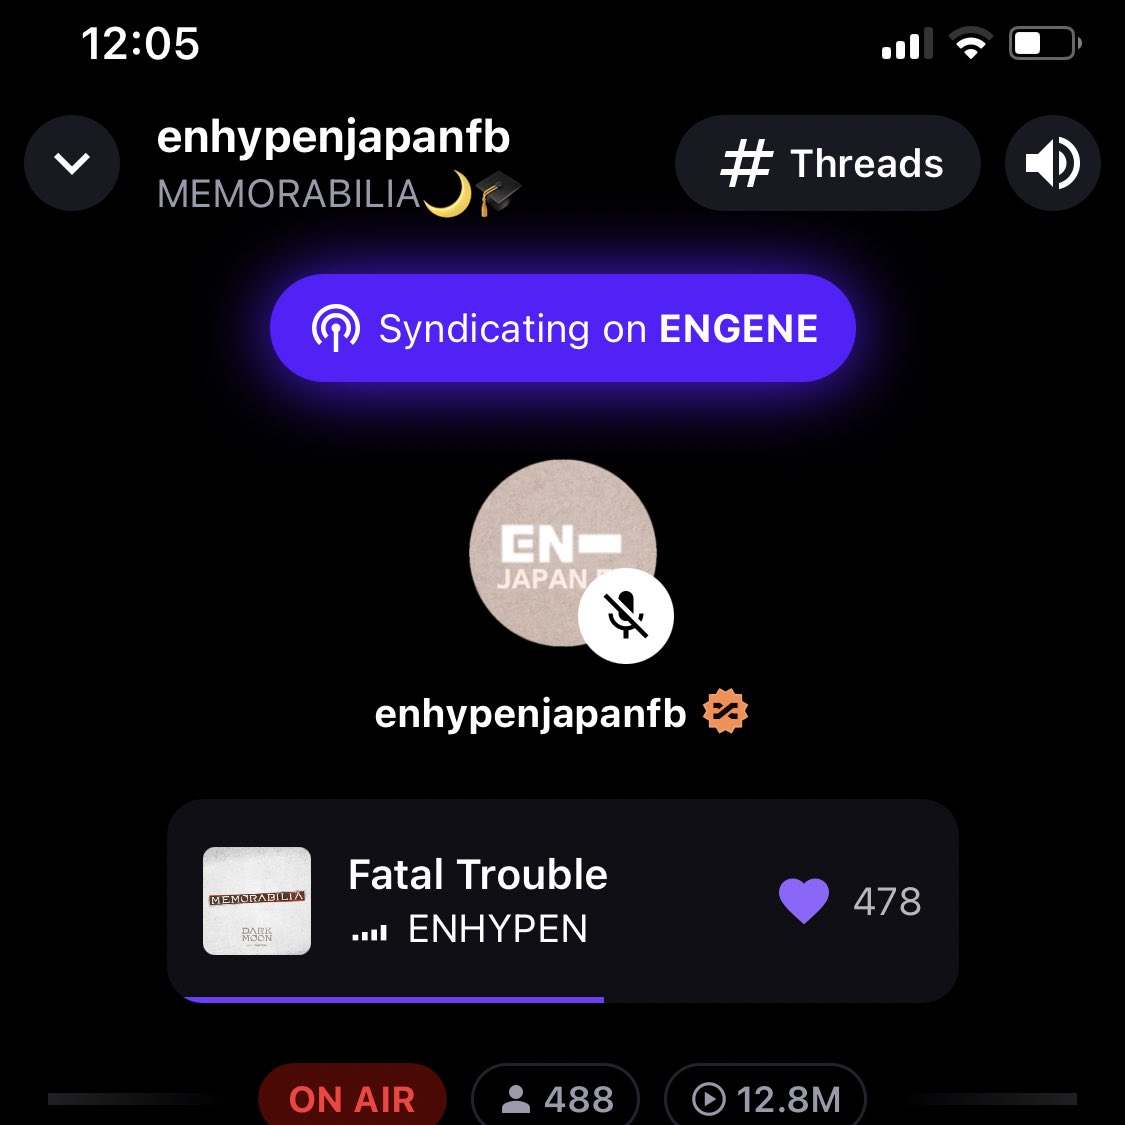 ENGENEs, you can still stream while sleeping! just run this playlists from @EN_onSpotify overnight. check out the links below! If you have stationhead, there's also streaming party happening right now. feel free to join if you can. share.stationhead.com/ptw6g9j3jvl0